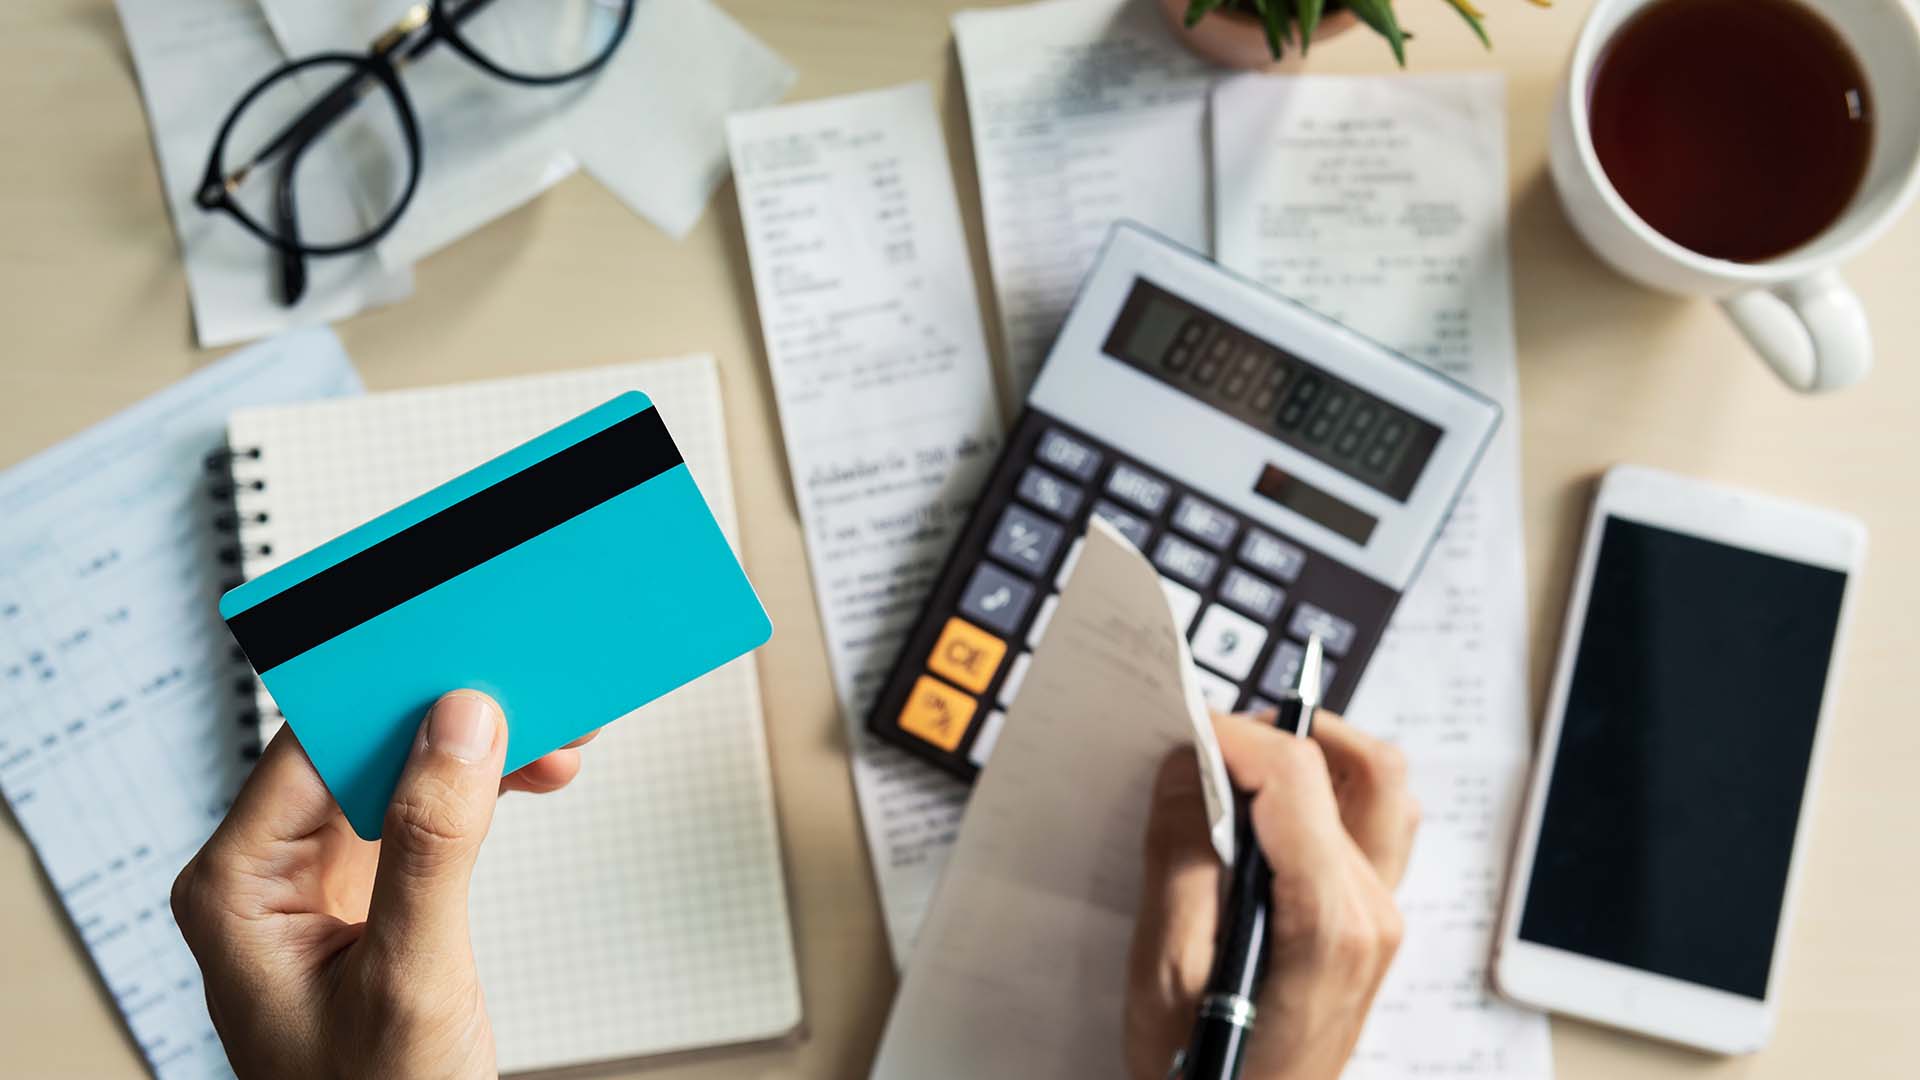 stock image of someone working on finances - calculator, phone, credit card, paper, pencil, etc. 